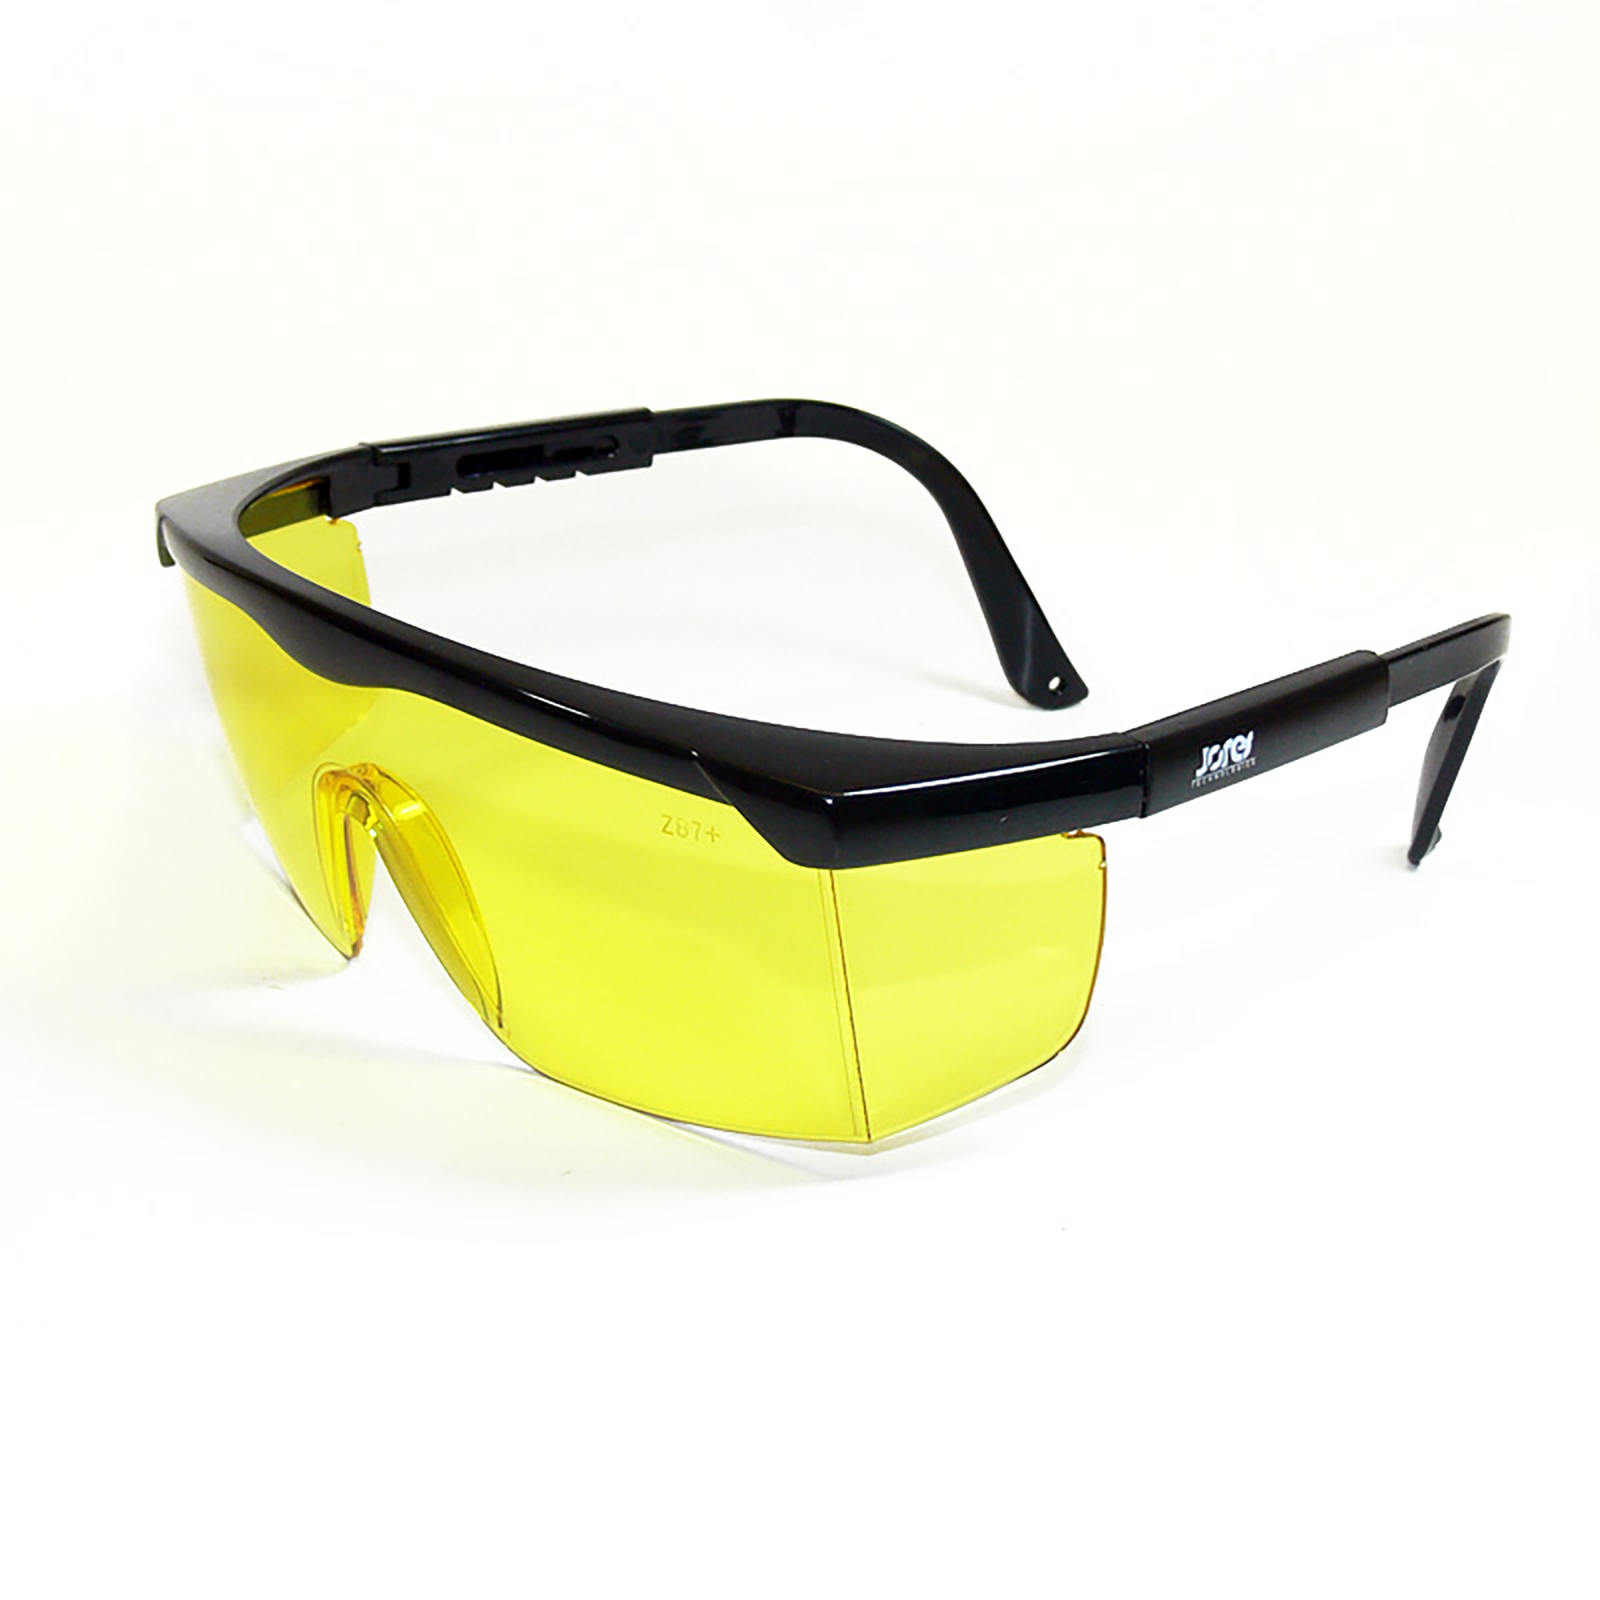 diagonal view of the black framed rectangular safety yellow glasses with side shields for high impact protection with adjustable temple legs